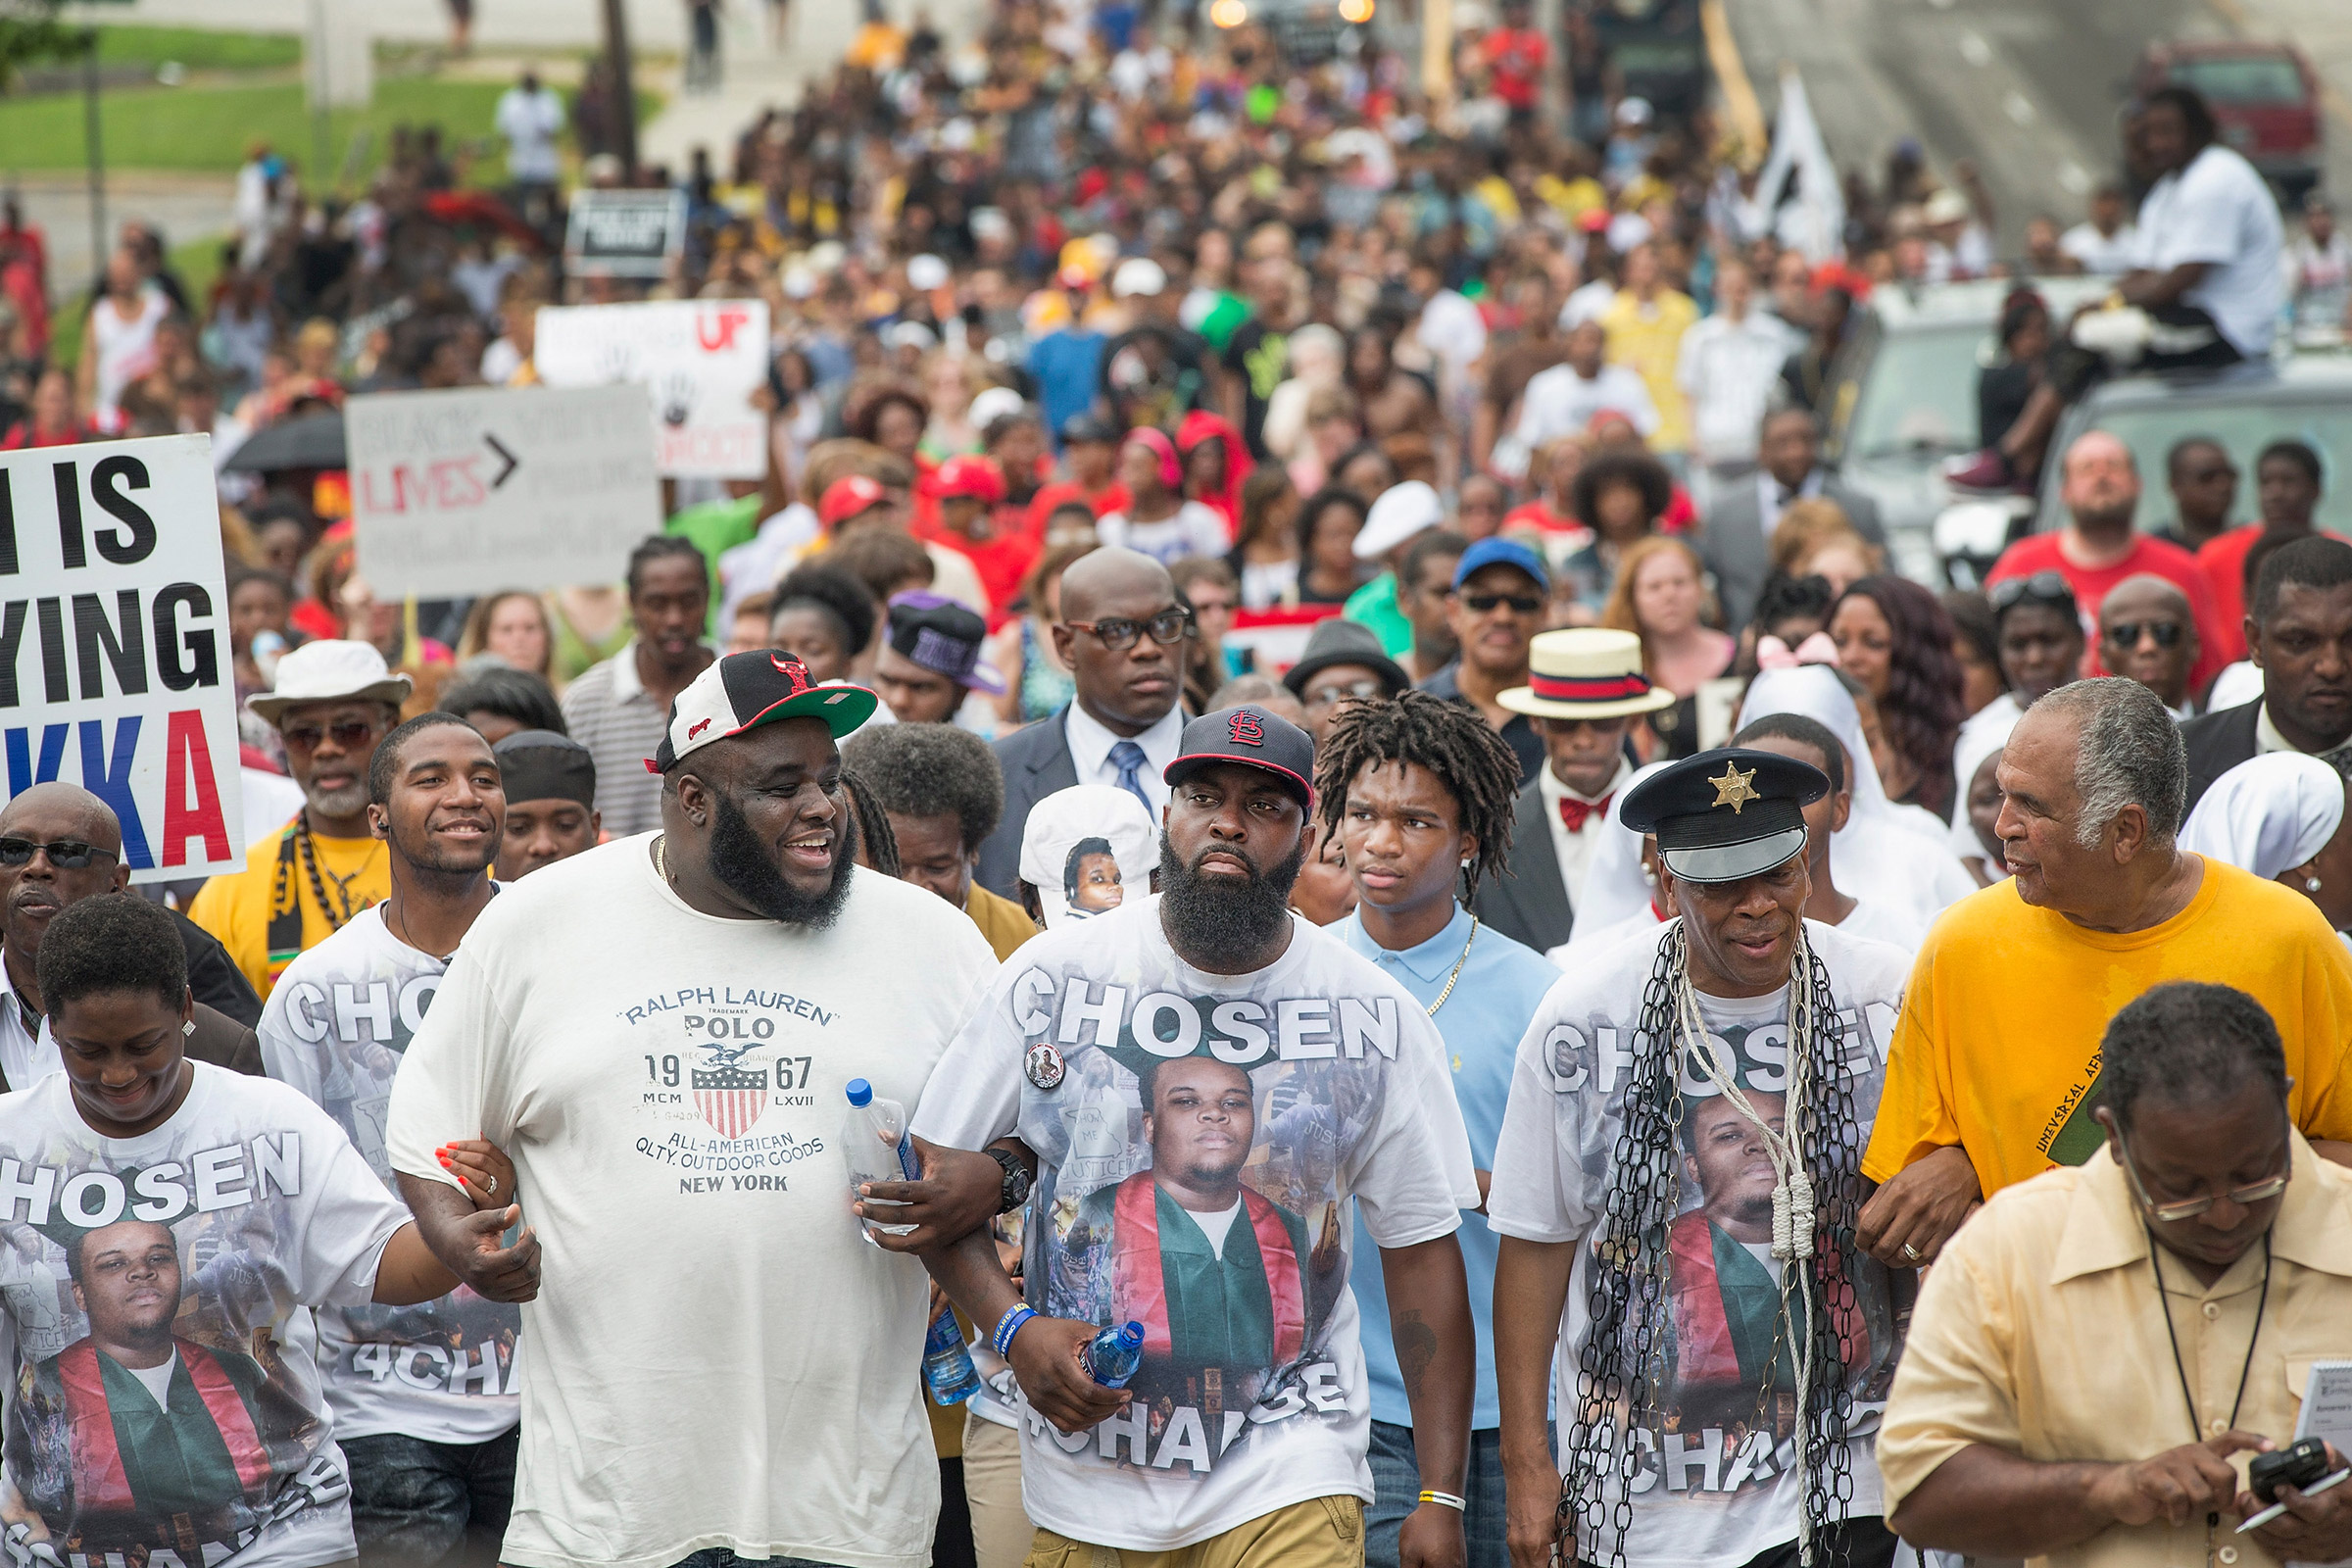 Michael Brown Sr. (center) leads a march from the location where his son Michael Brown Jr. was shot and killed following a memorial service marking the anniversary of his death in Ferguson, Mo. on Aug. 9, 2015. (Scott Olson—Getty Images)